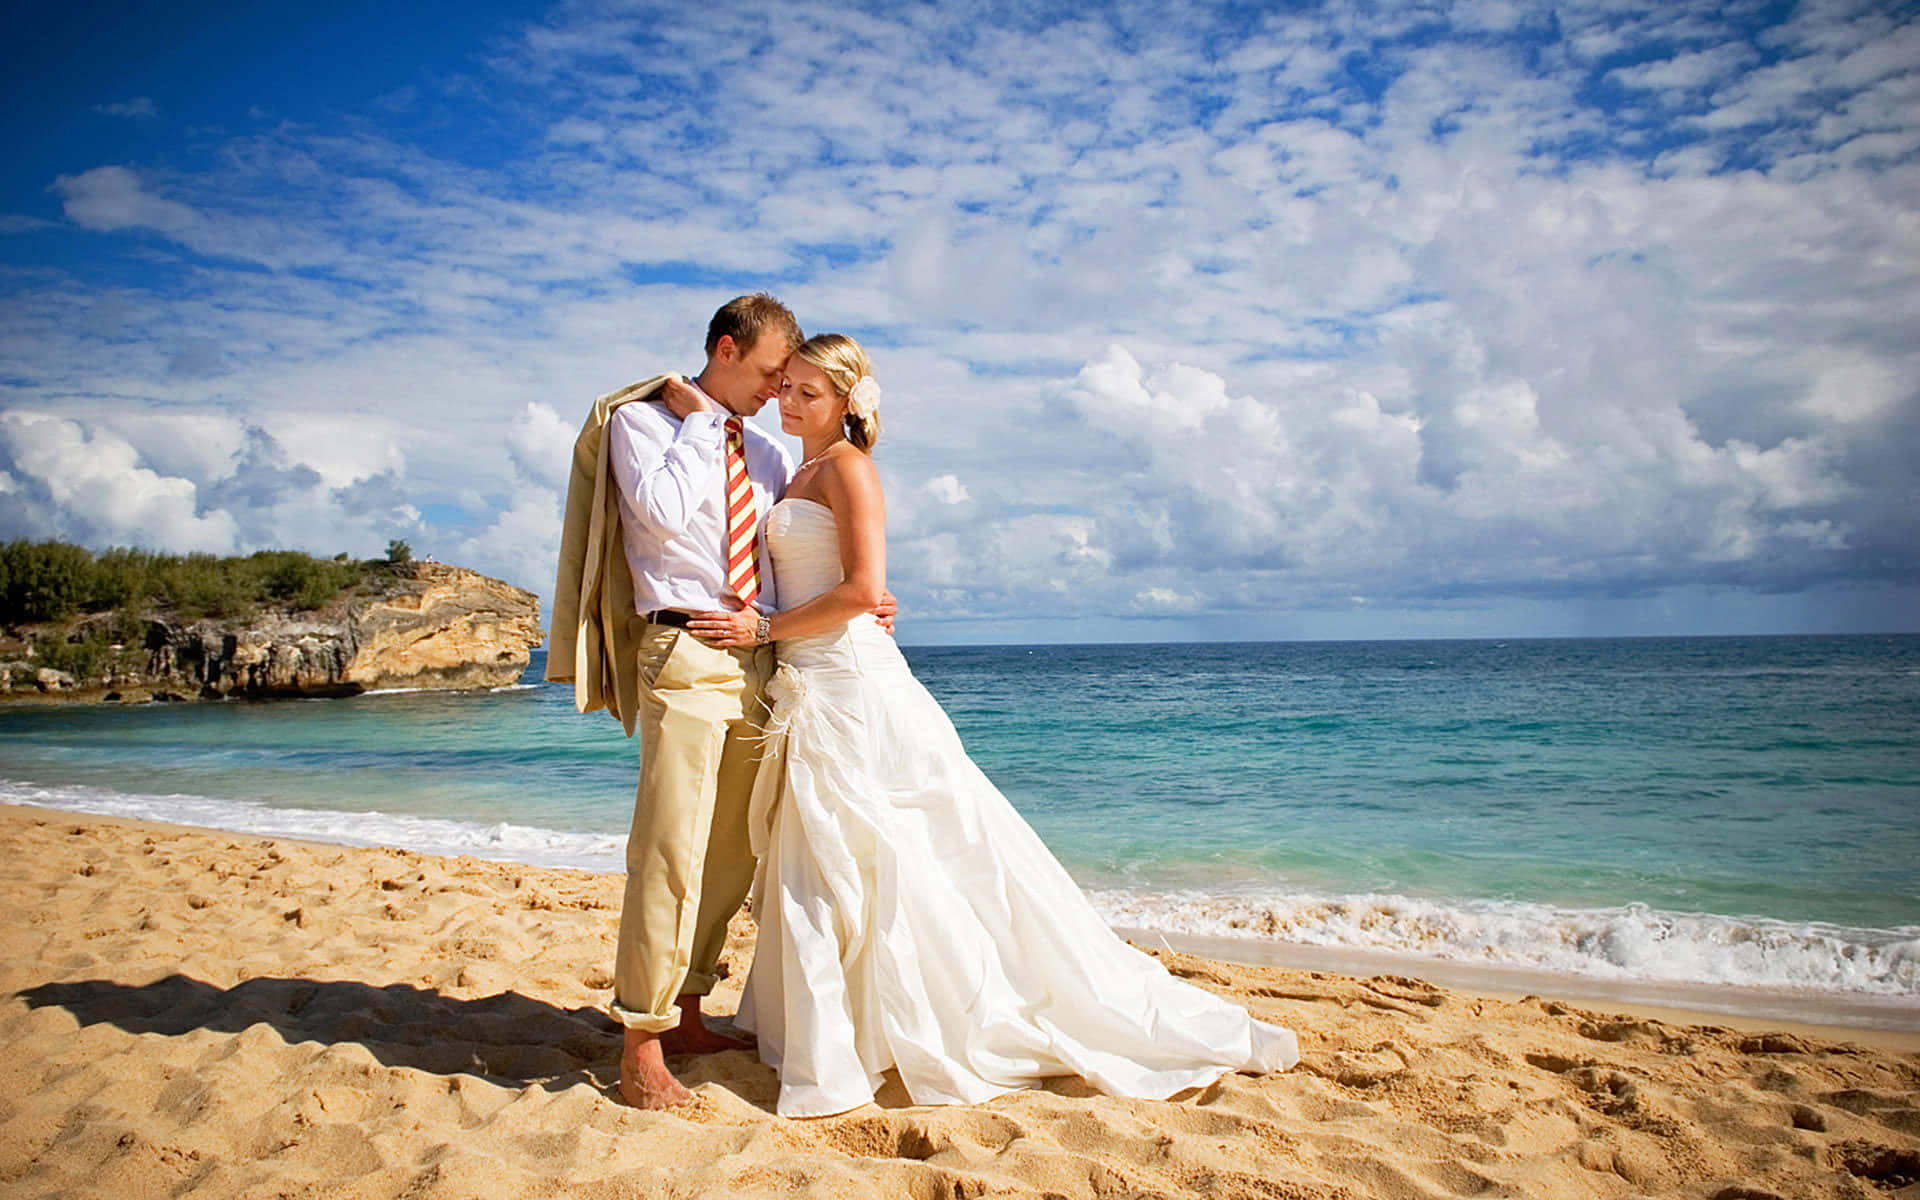 "a Perfect Moment Of Bliss - Couple Tying The Knot On A Stunning Beach At Sunset" Wallpaper